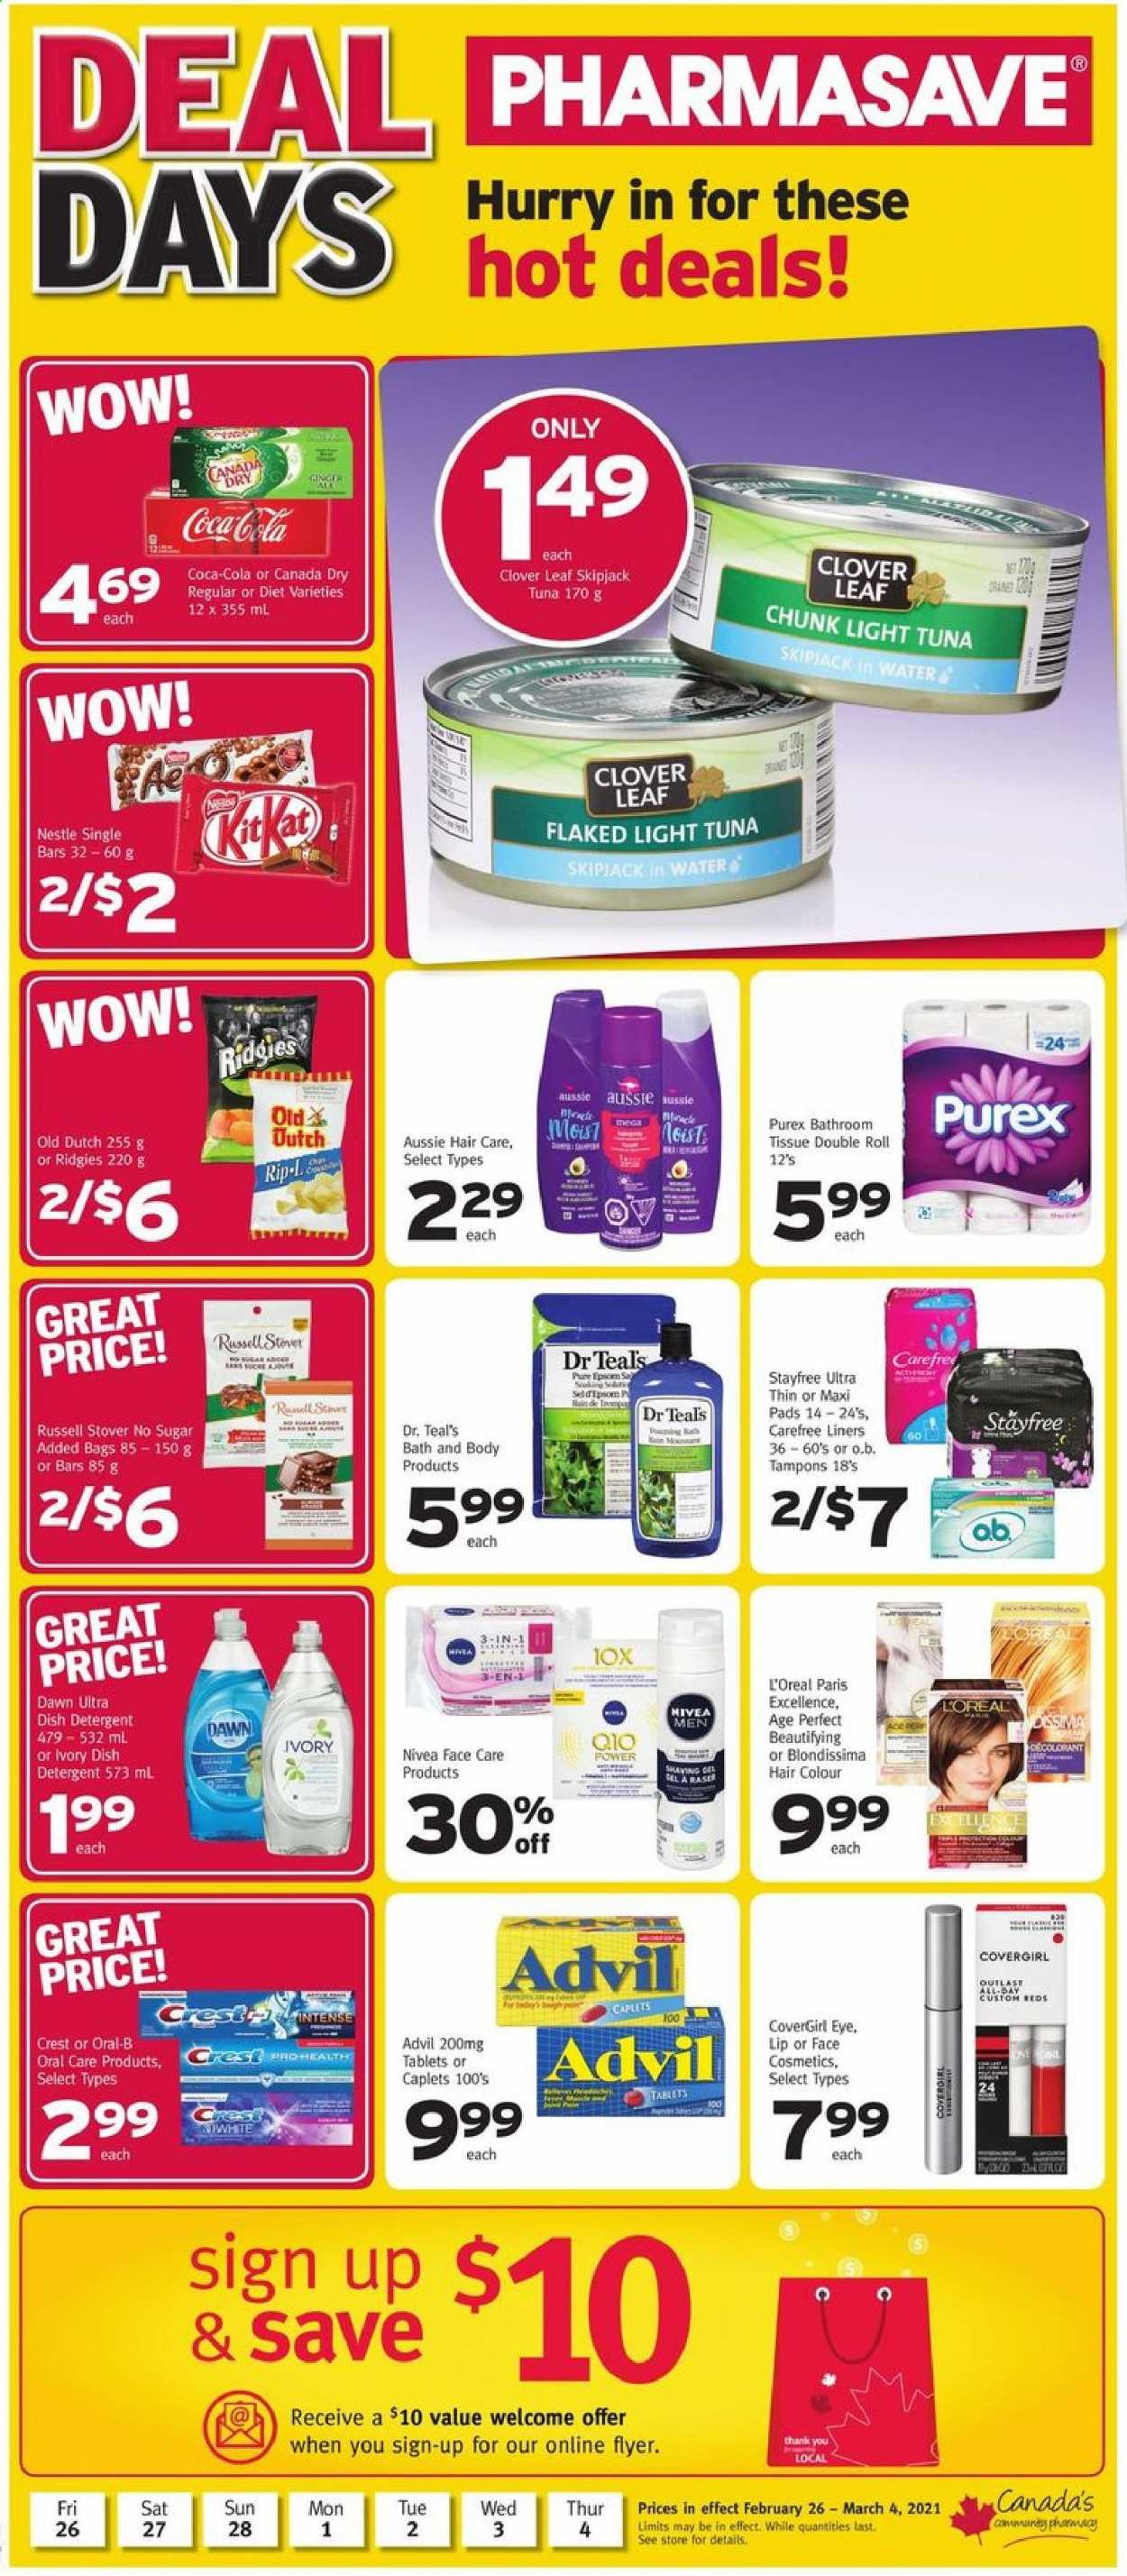 thumbnail - Pharmasave Flyer - February 26, 2021 - March 04, 2021 - Sales products - tuna, Clover, light tuna, Canada Dry, Coca-Cola, bath tissue, Purex, Crest, Stayfree, sanitary pads, Carefree, tampons, L’Oréal, Aussie, hair color, pin, Advil Rapid, Nestlé, Nivea, Oral-B. Page 1.